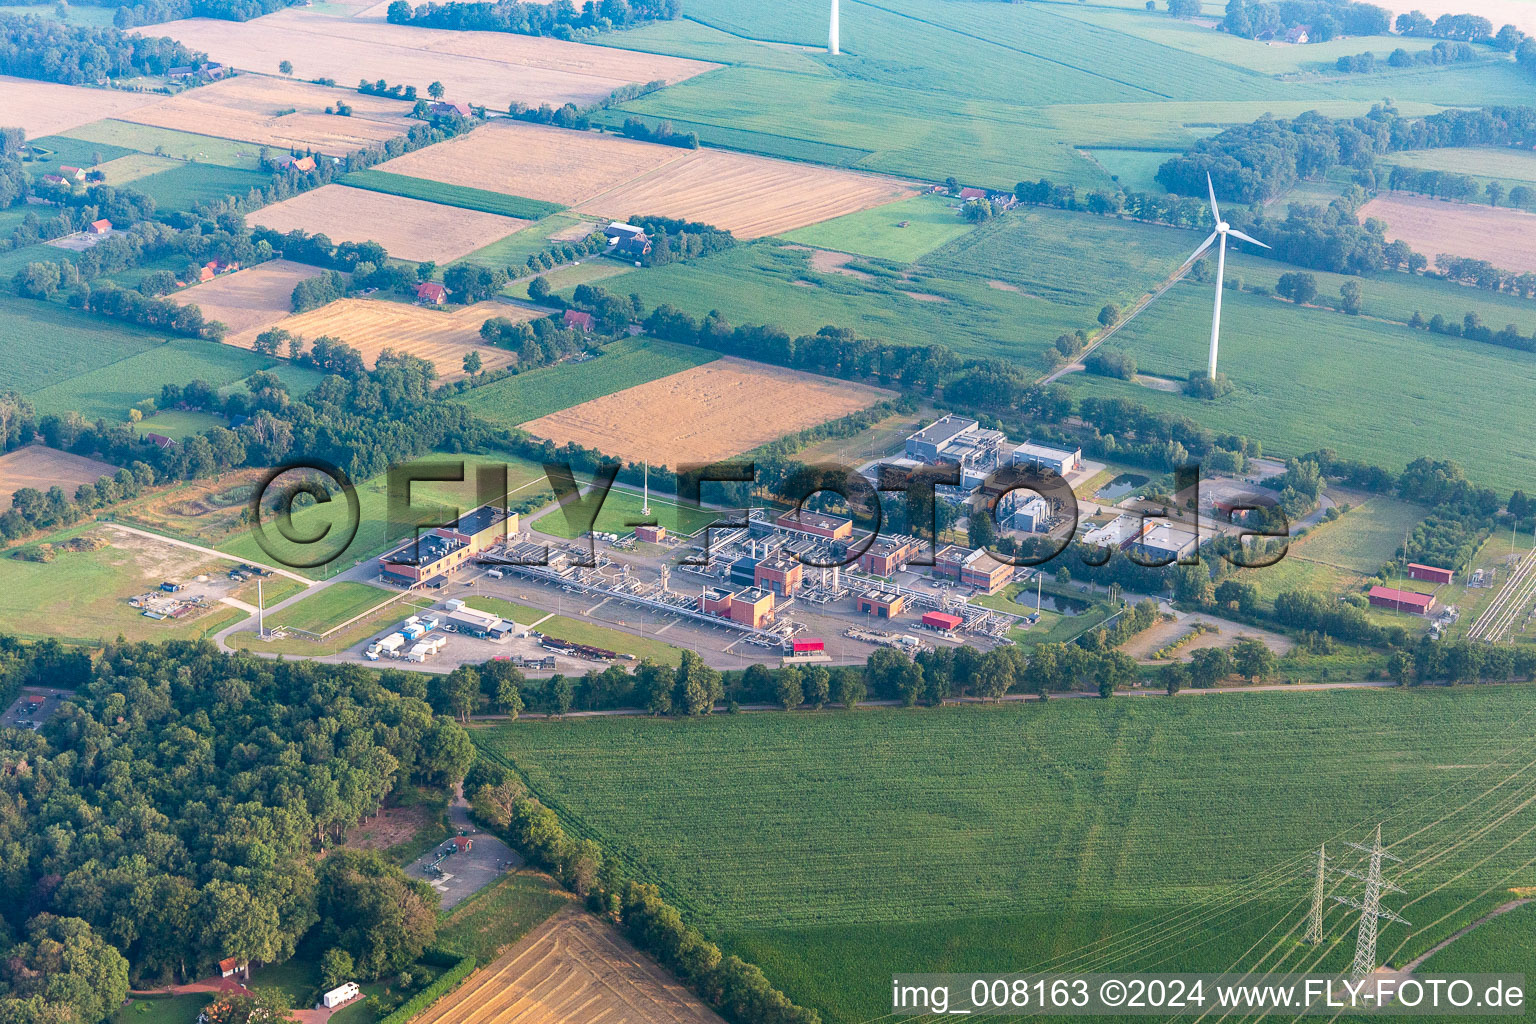 Overground facilities of the Natural gas storage Epe-L of the Nuon Epe Gasspeicher GmbH and RWE Gas Storage West GmbH in Epe in the state North Rhine-Westphalia, Germany